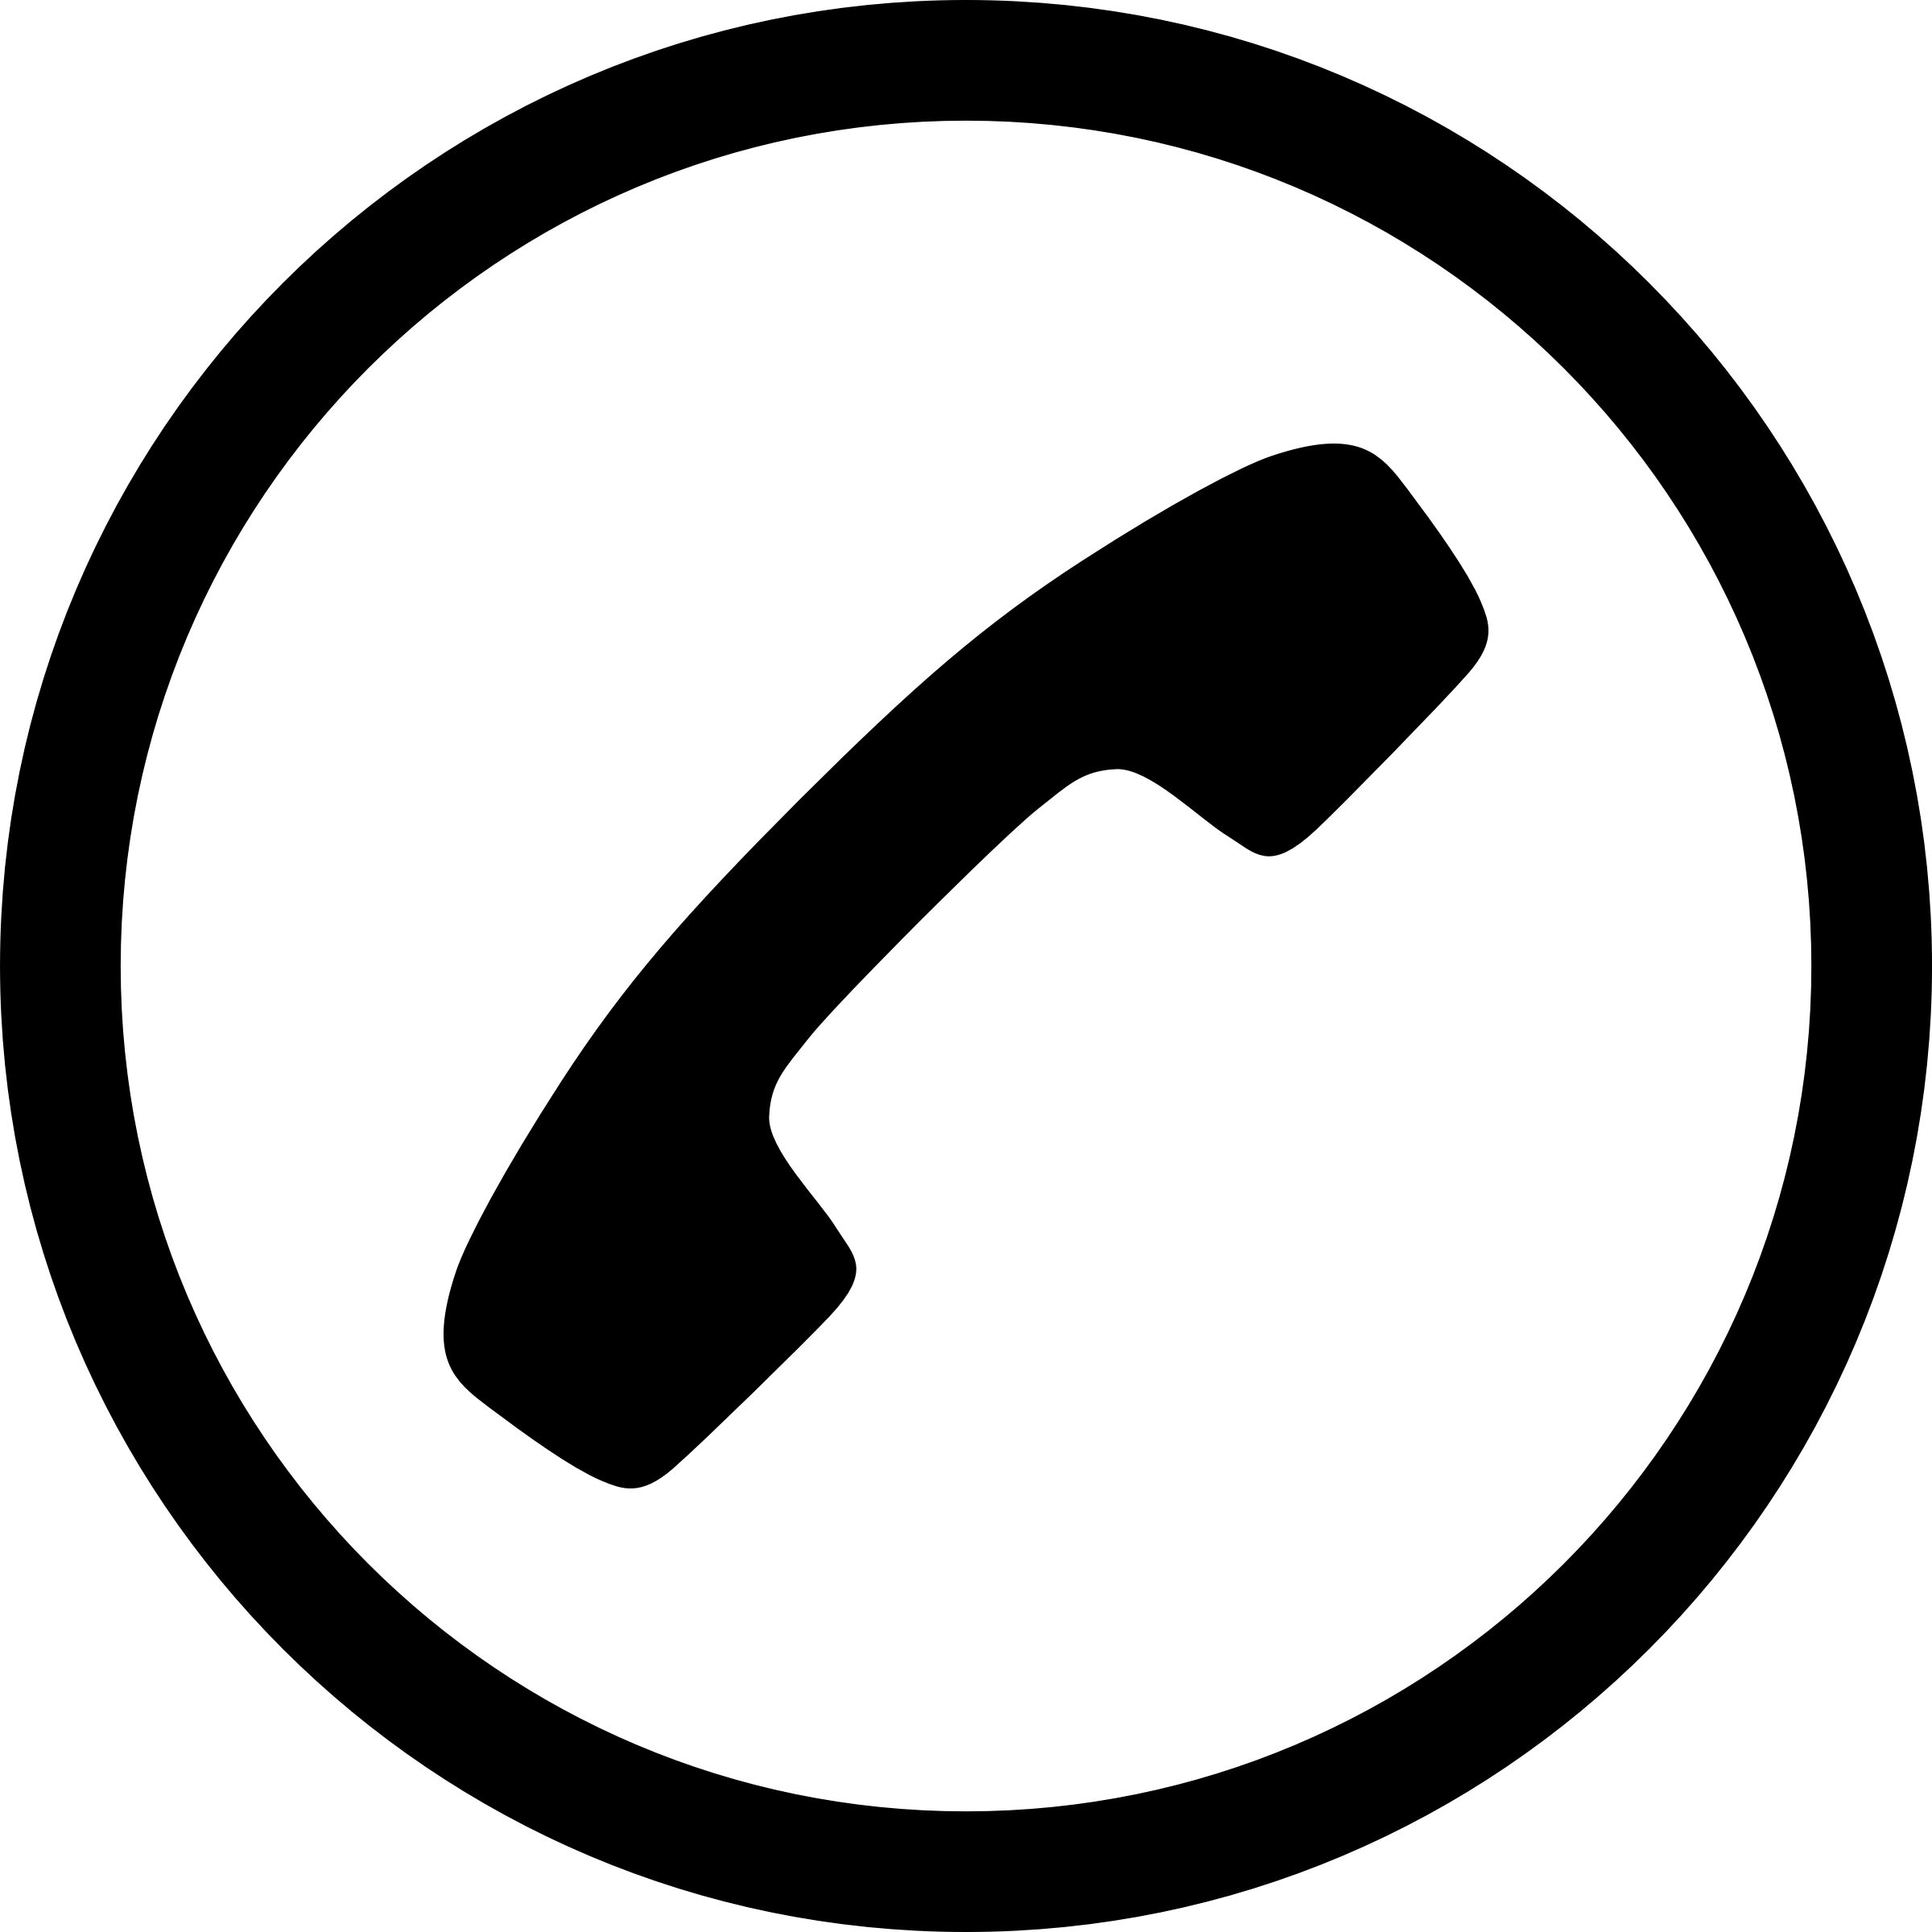 Small Phone Logo - Phone Icon Logo Png Images